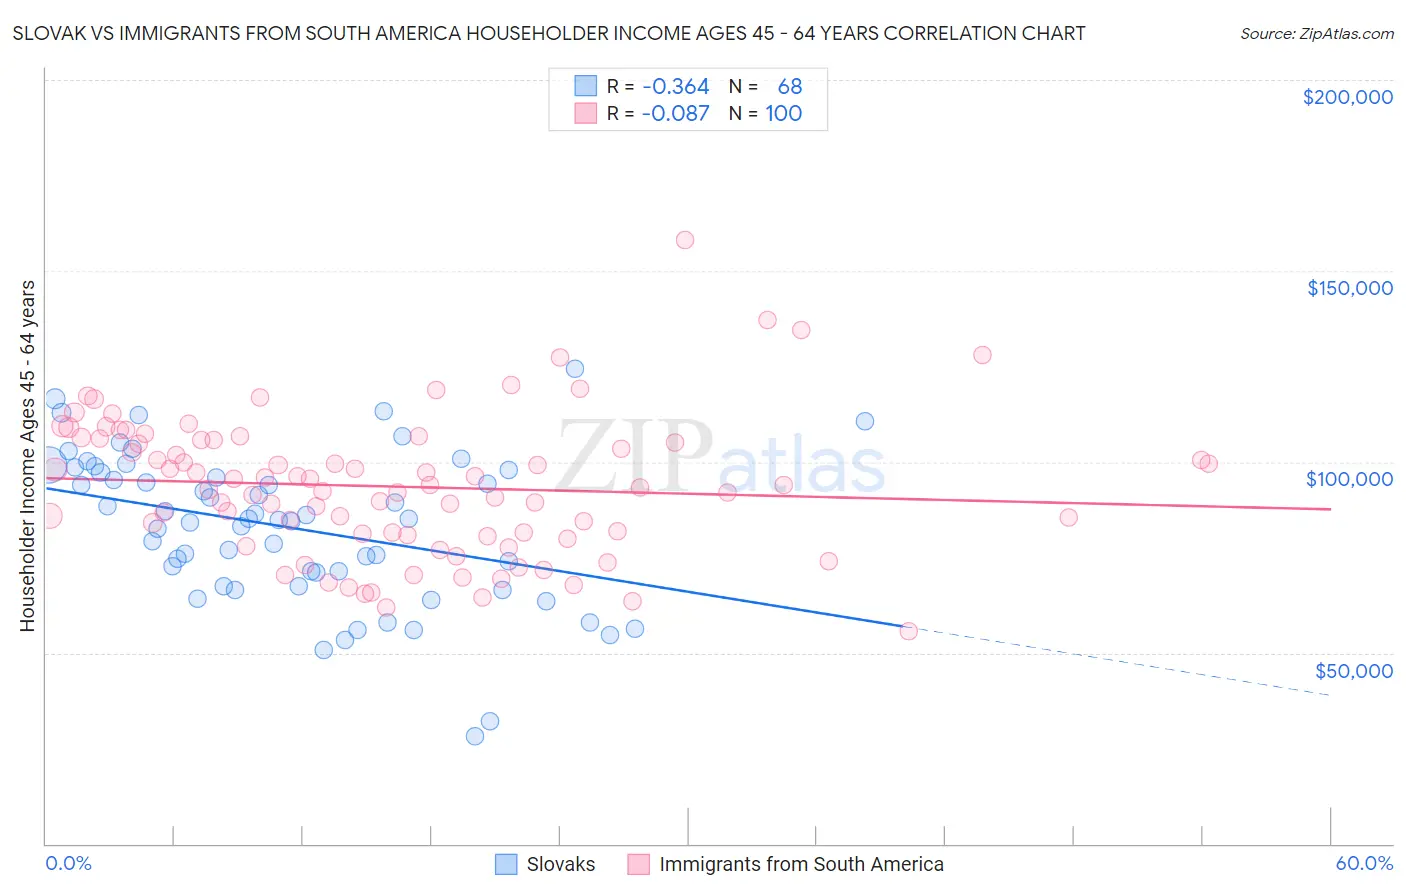 Slovak vs Immigrants from South America Householder Income Ages 45 - 64 years